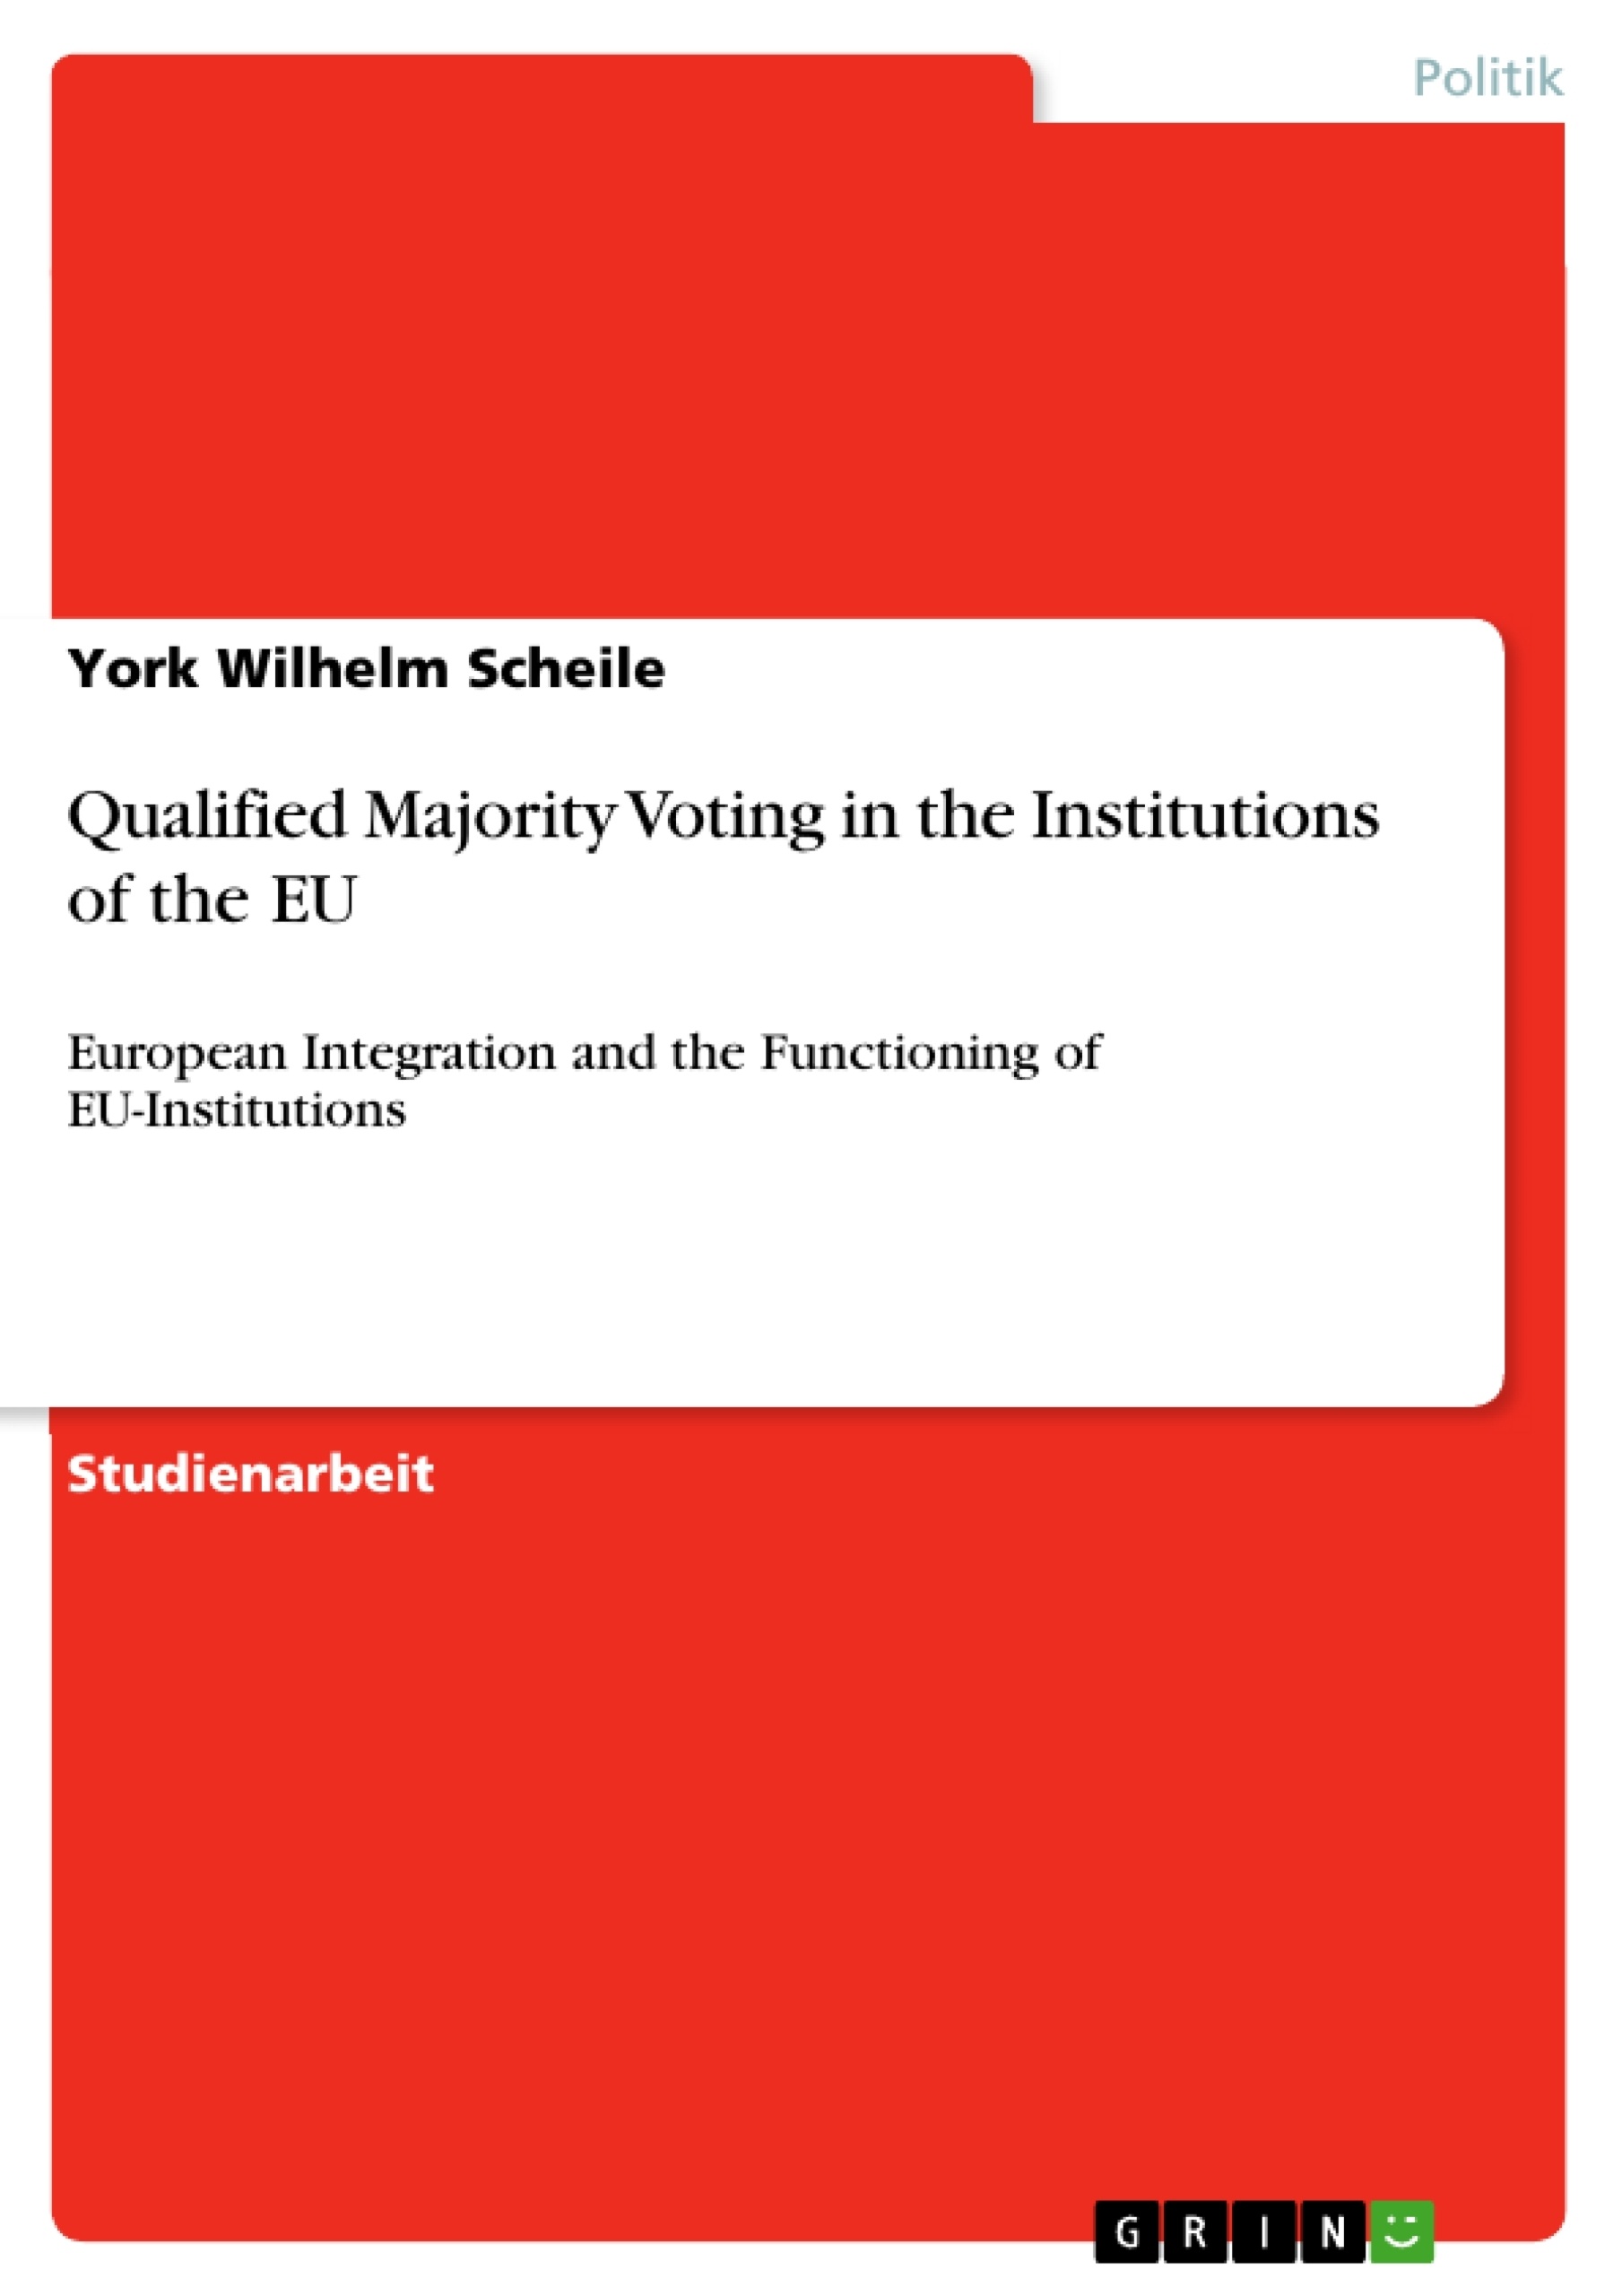 Titel: Qualified Majority Voting in the Institutions of the EU